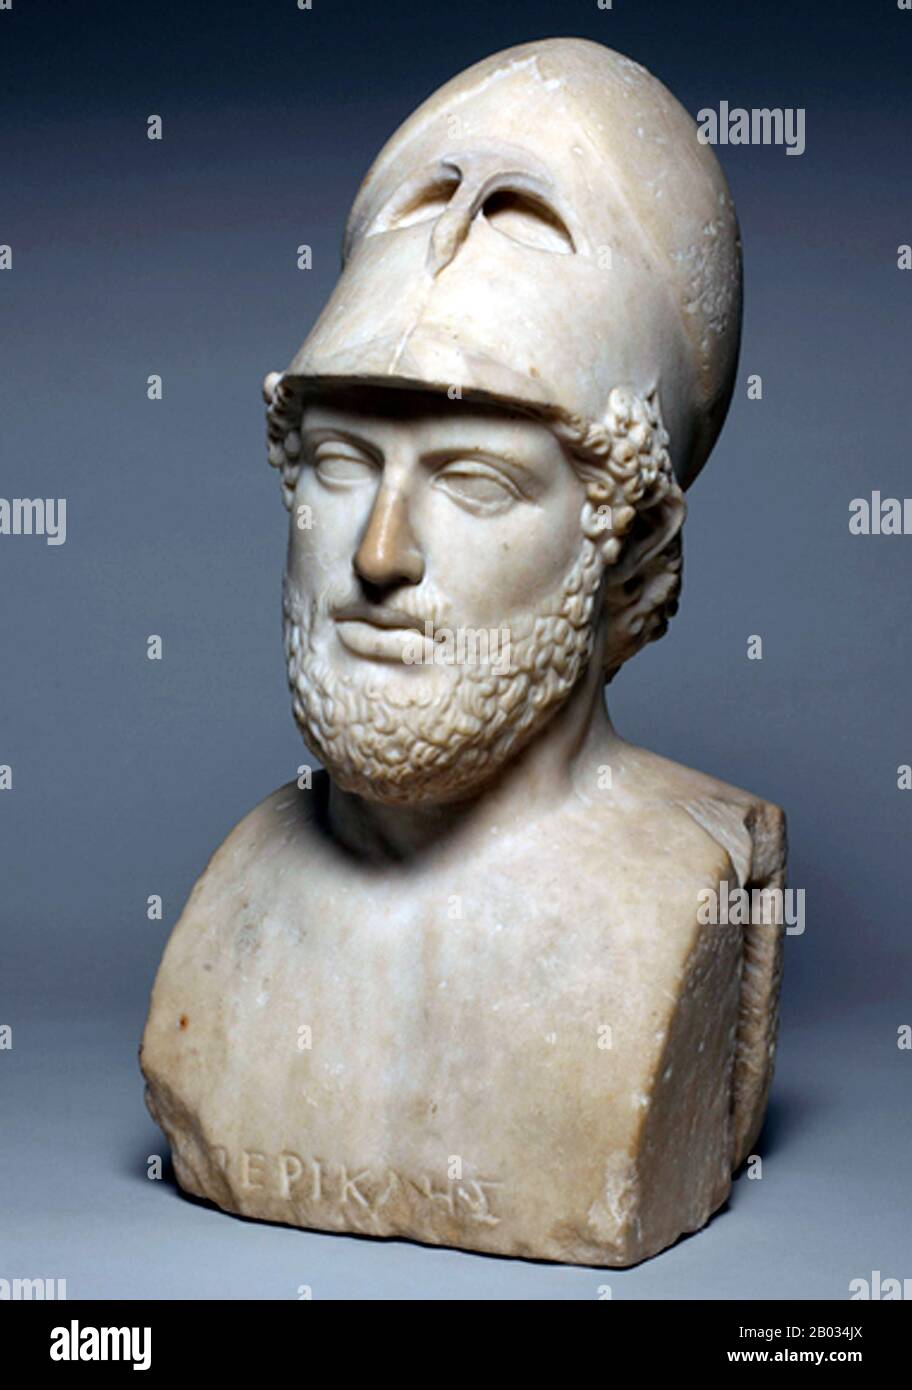 Pericles was a prominent and influential Greek statesman, orator and general of Athens during the Golden Age—specifically the time between the Persian and Peloponnesian wars.  Pericles had such a profound influence on Athenian society that Thucydides, a contemporary historian, acclaimed him as 'the first citizen of Athens'. Stock Photo